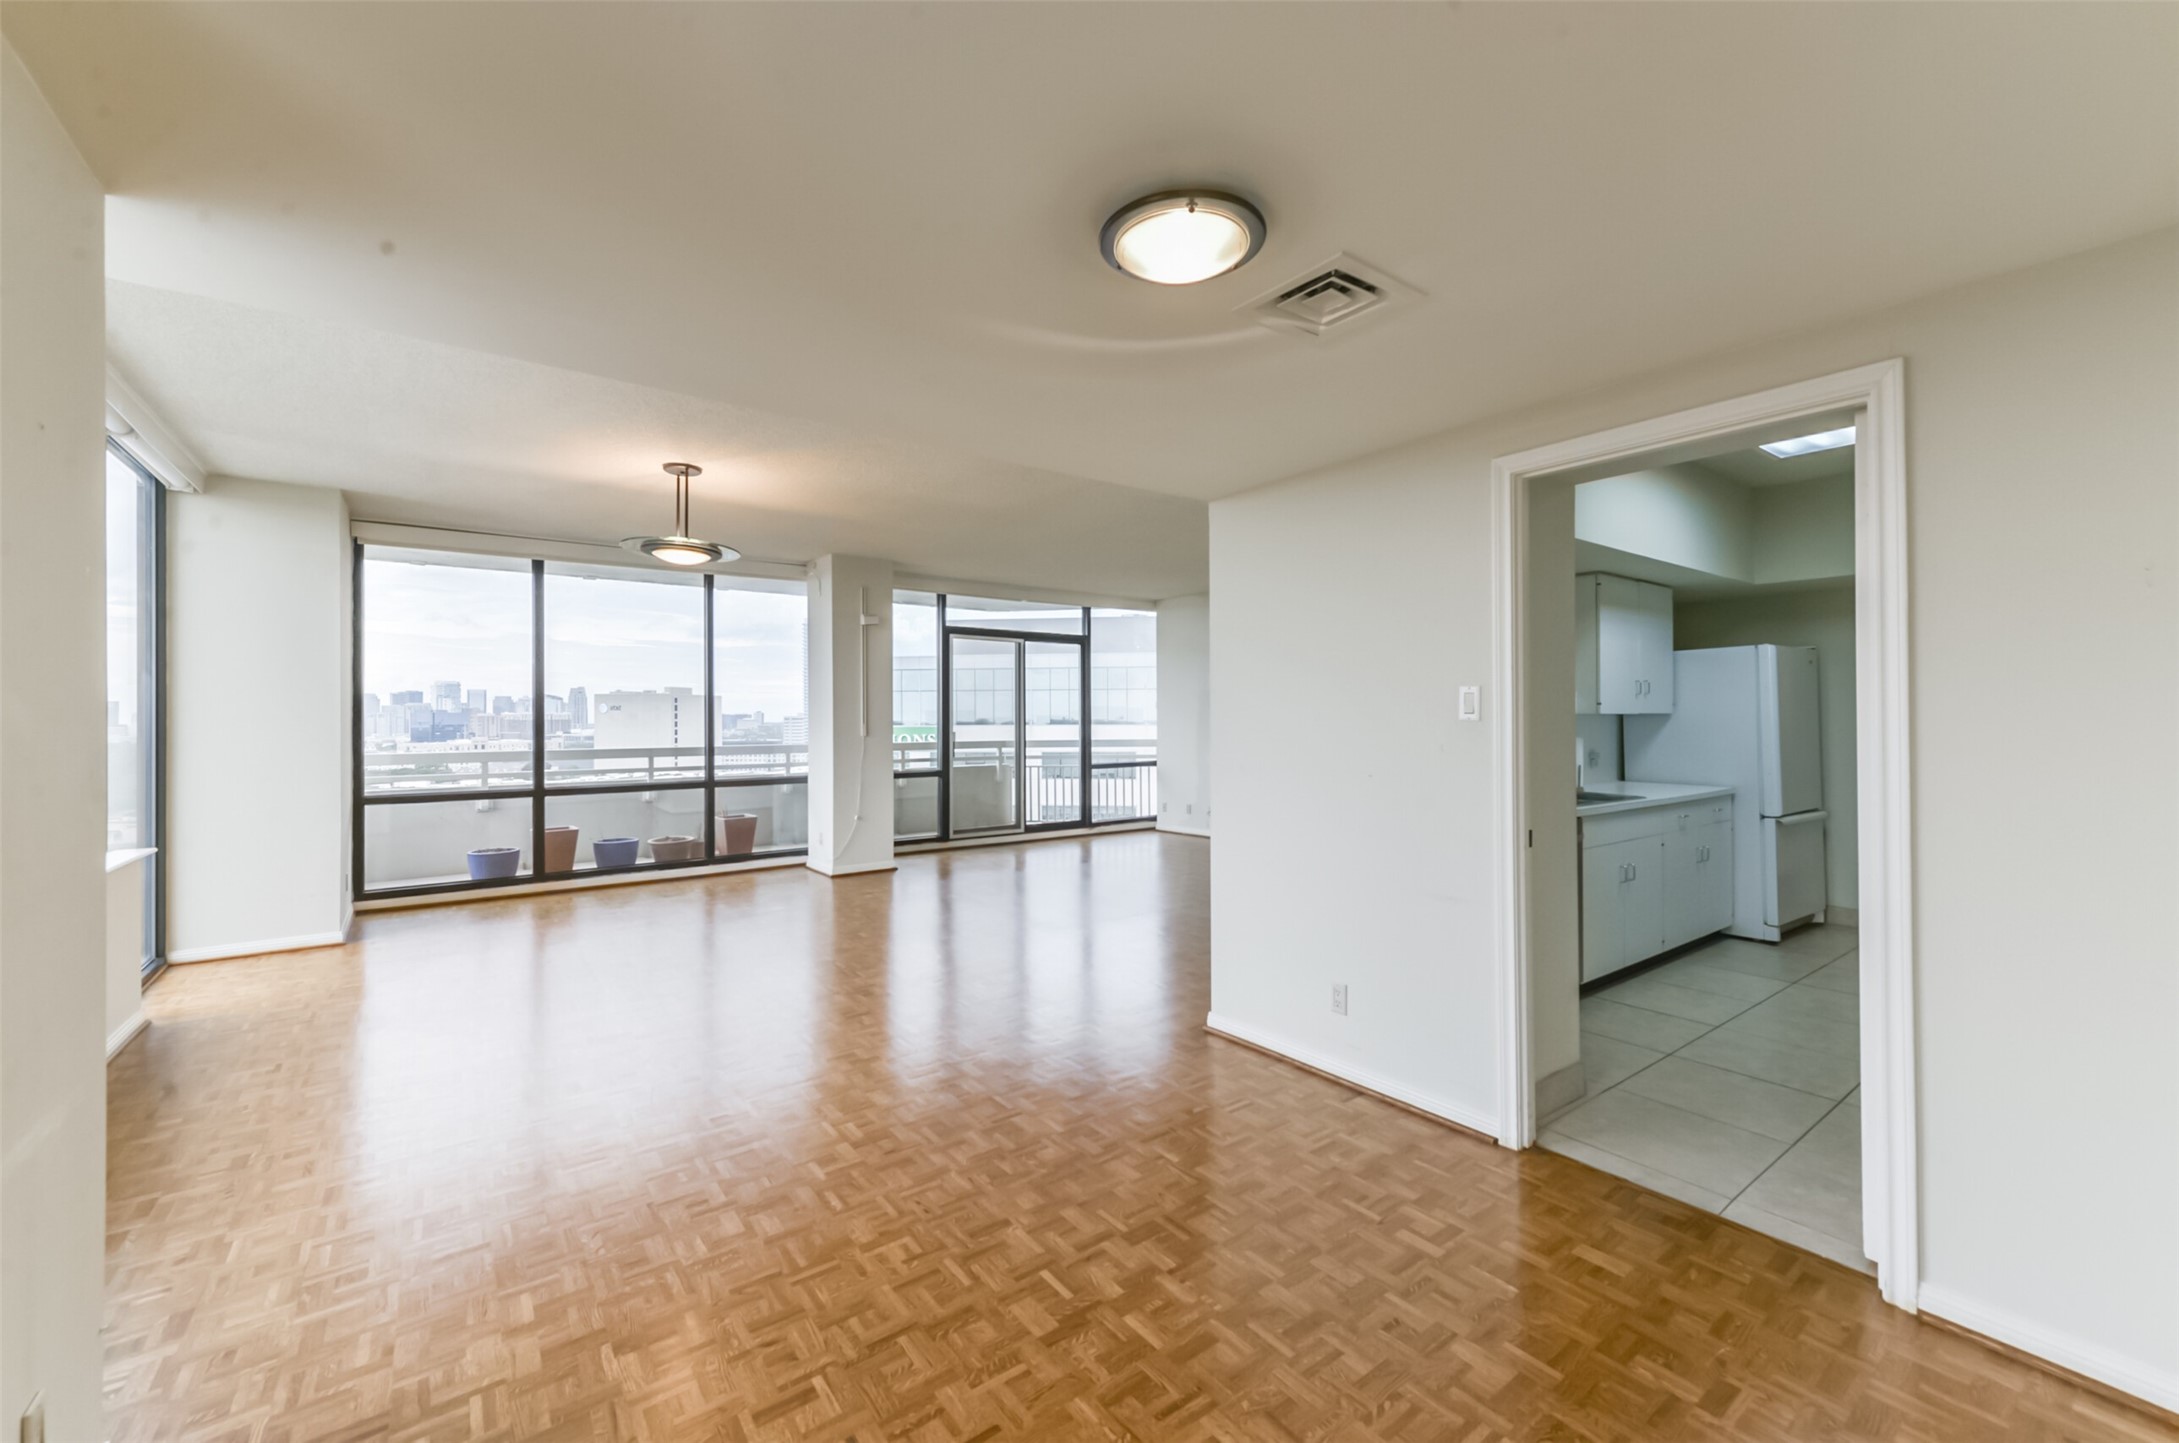 The living area wraps around providing corner views and access to the kitchen. - If you have additional questions regarding 14 Greenway Plaza  in Houston or would like to tour the property with us call 800-660-1022 and reference MLS# 26451519.